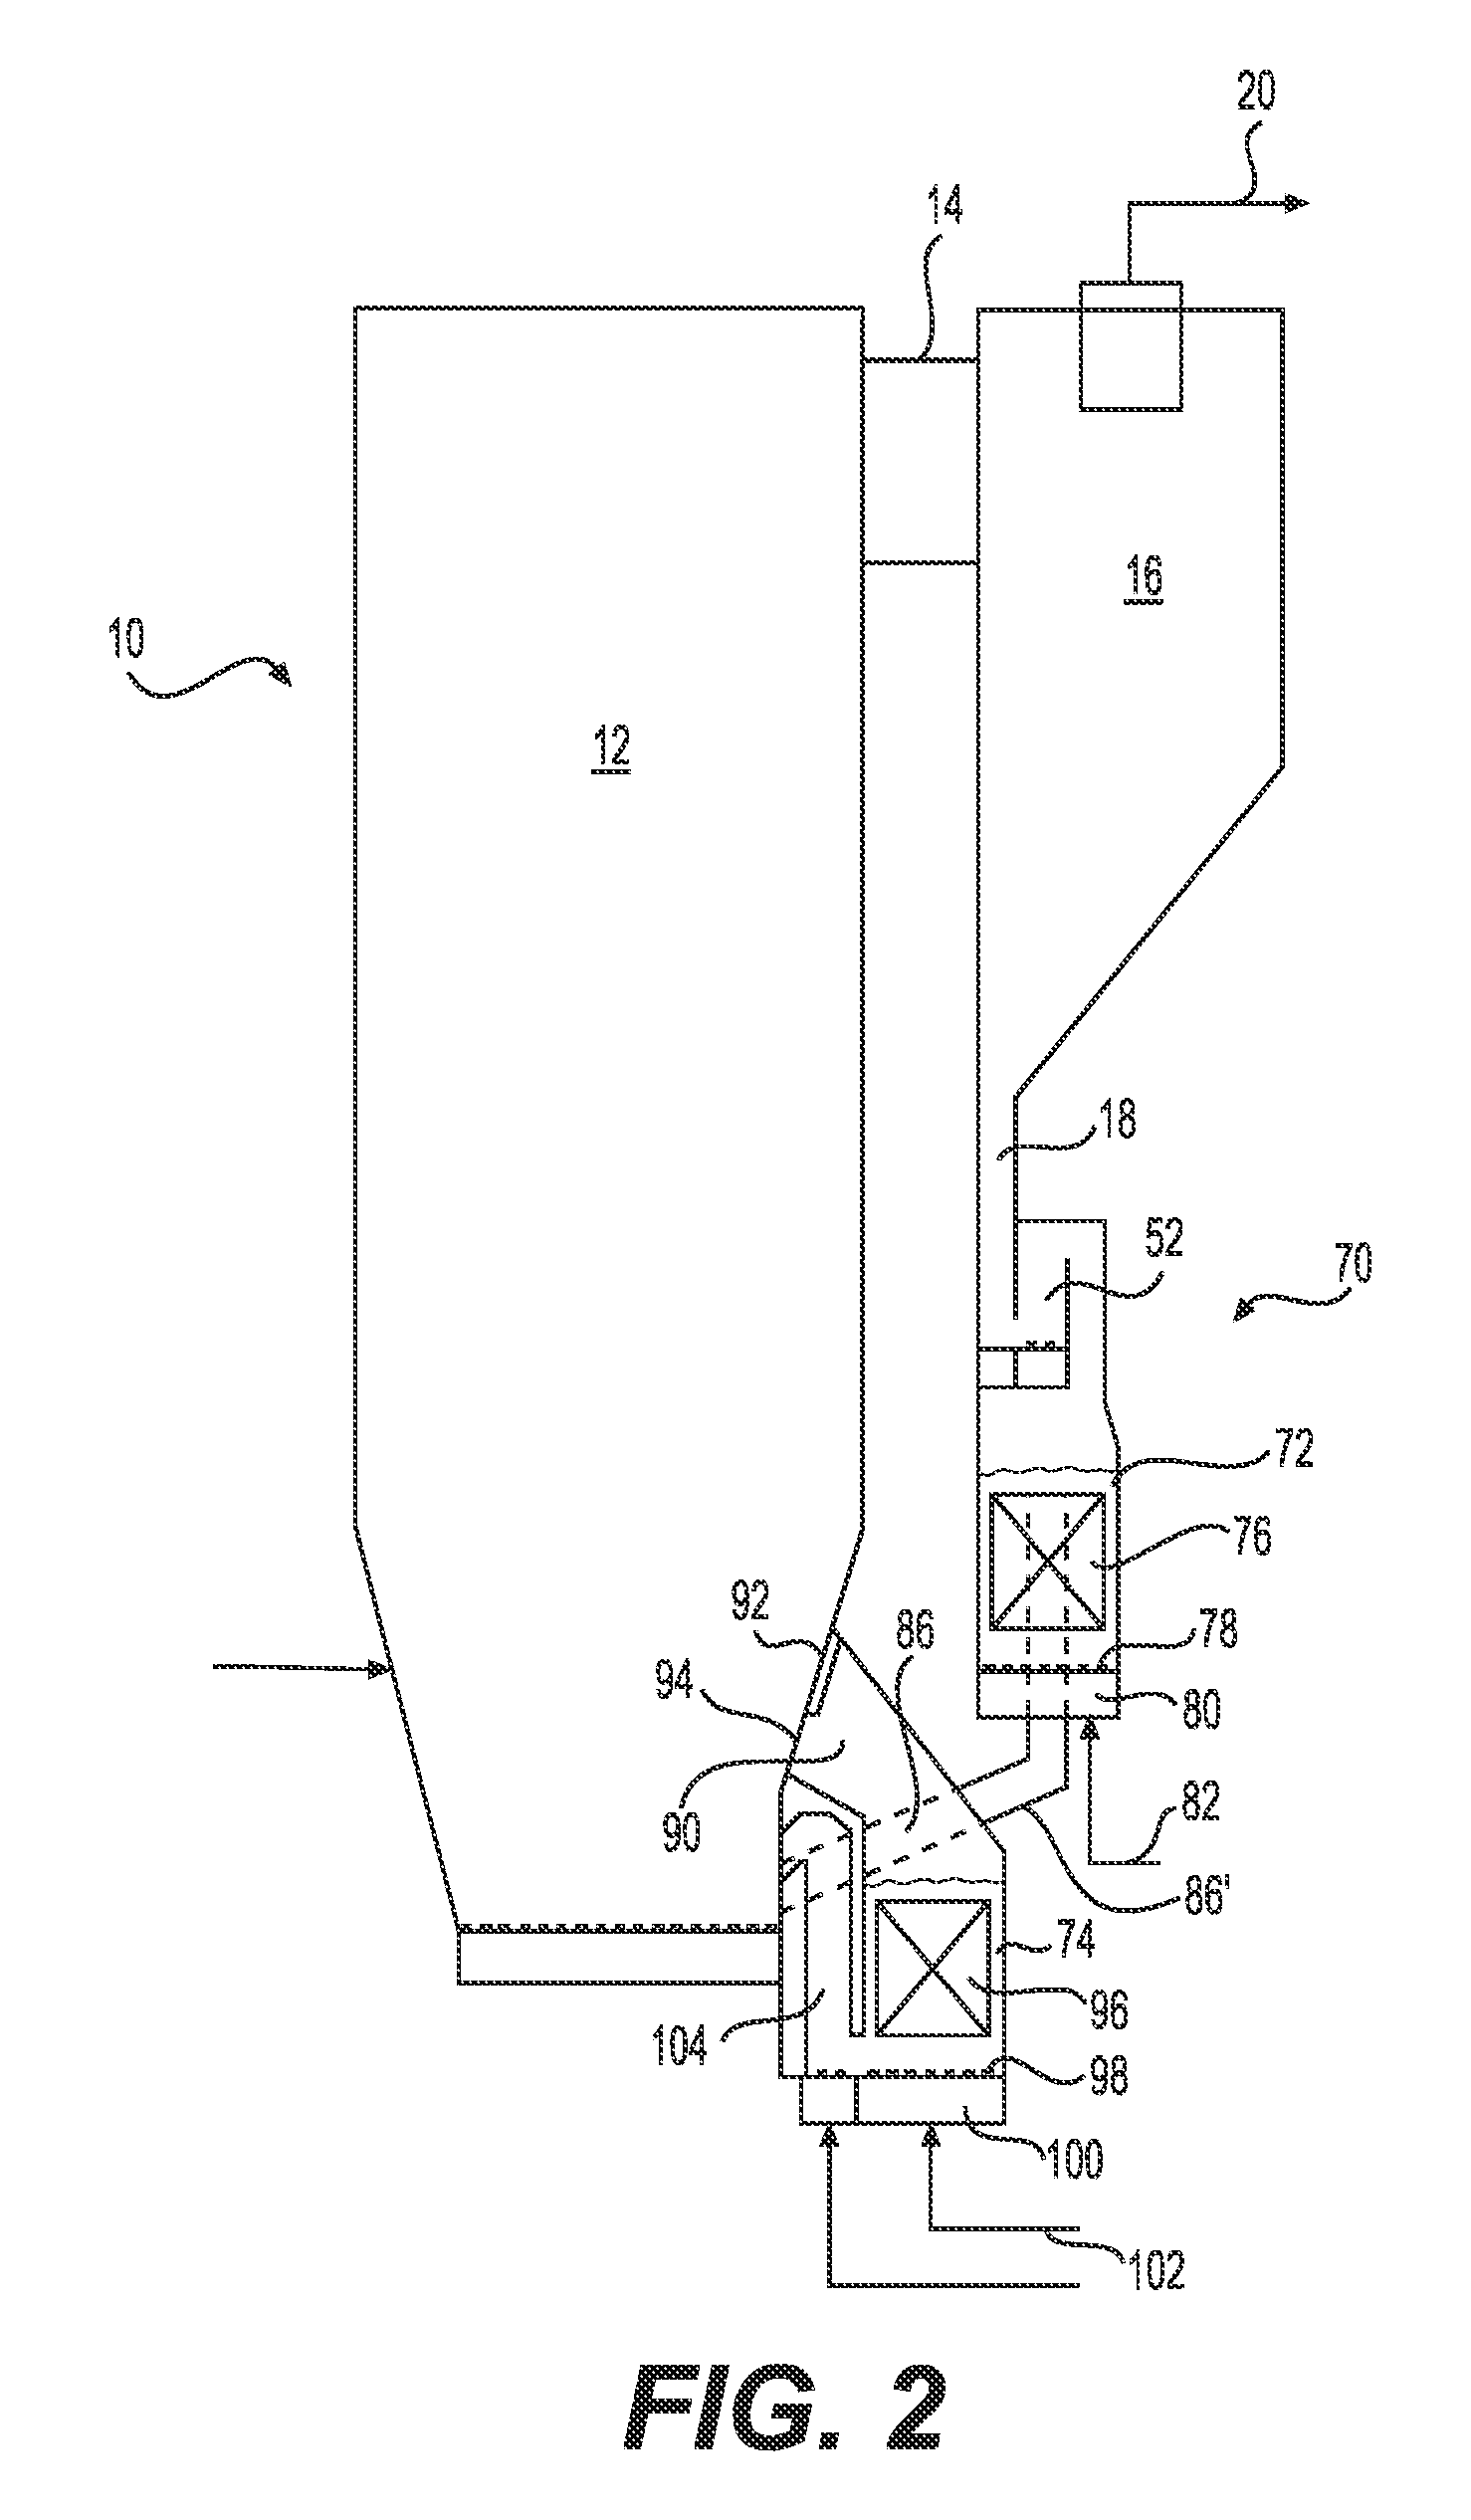 Circulating fluidized bed boiler having two external heat exchangers for hot solids flow